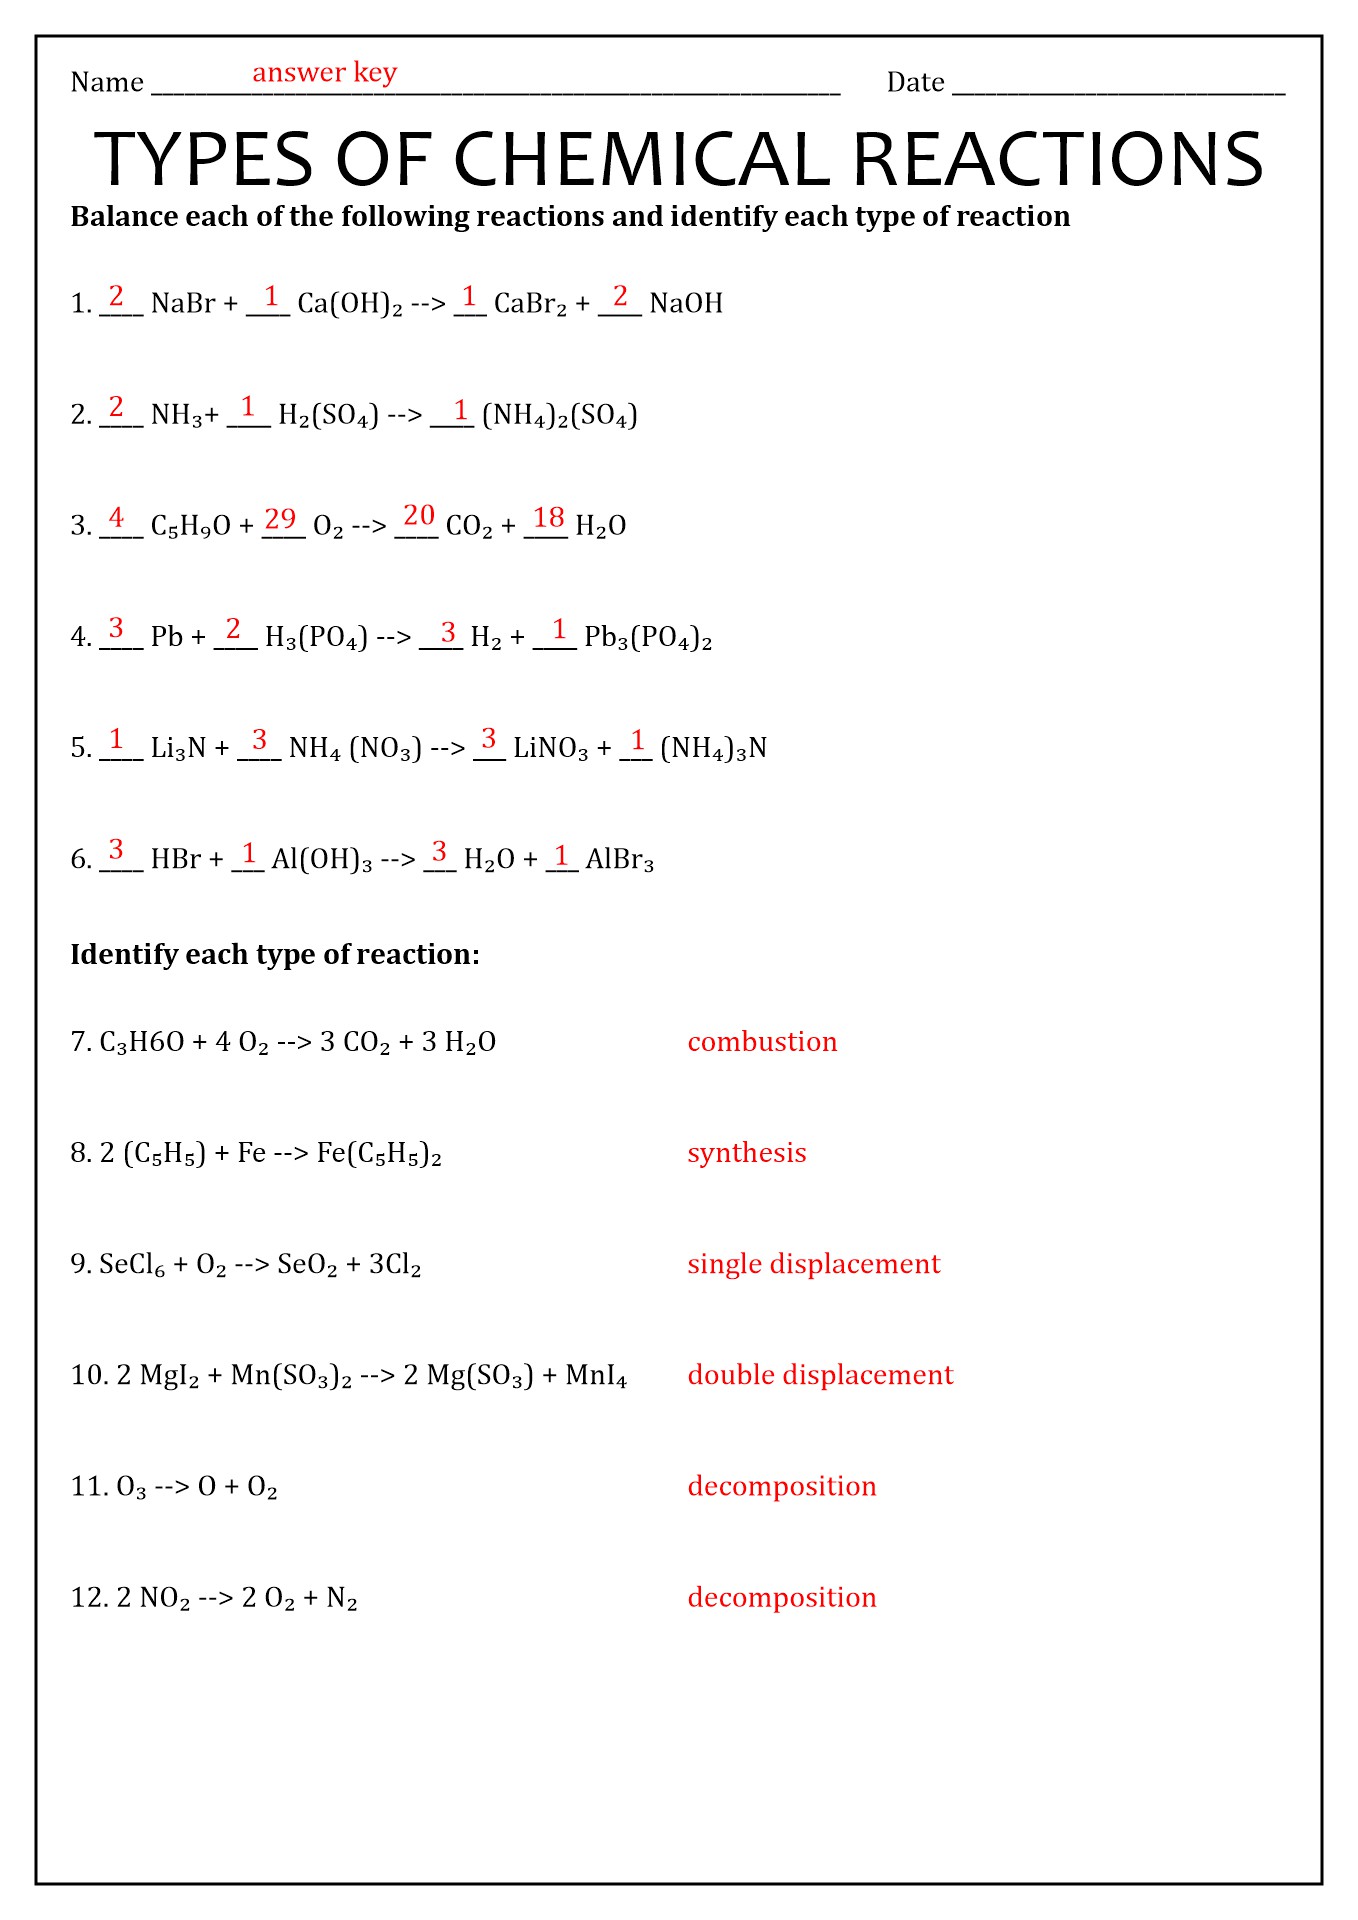 types-of-chemical-reaction-worksheet-answers